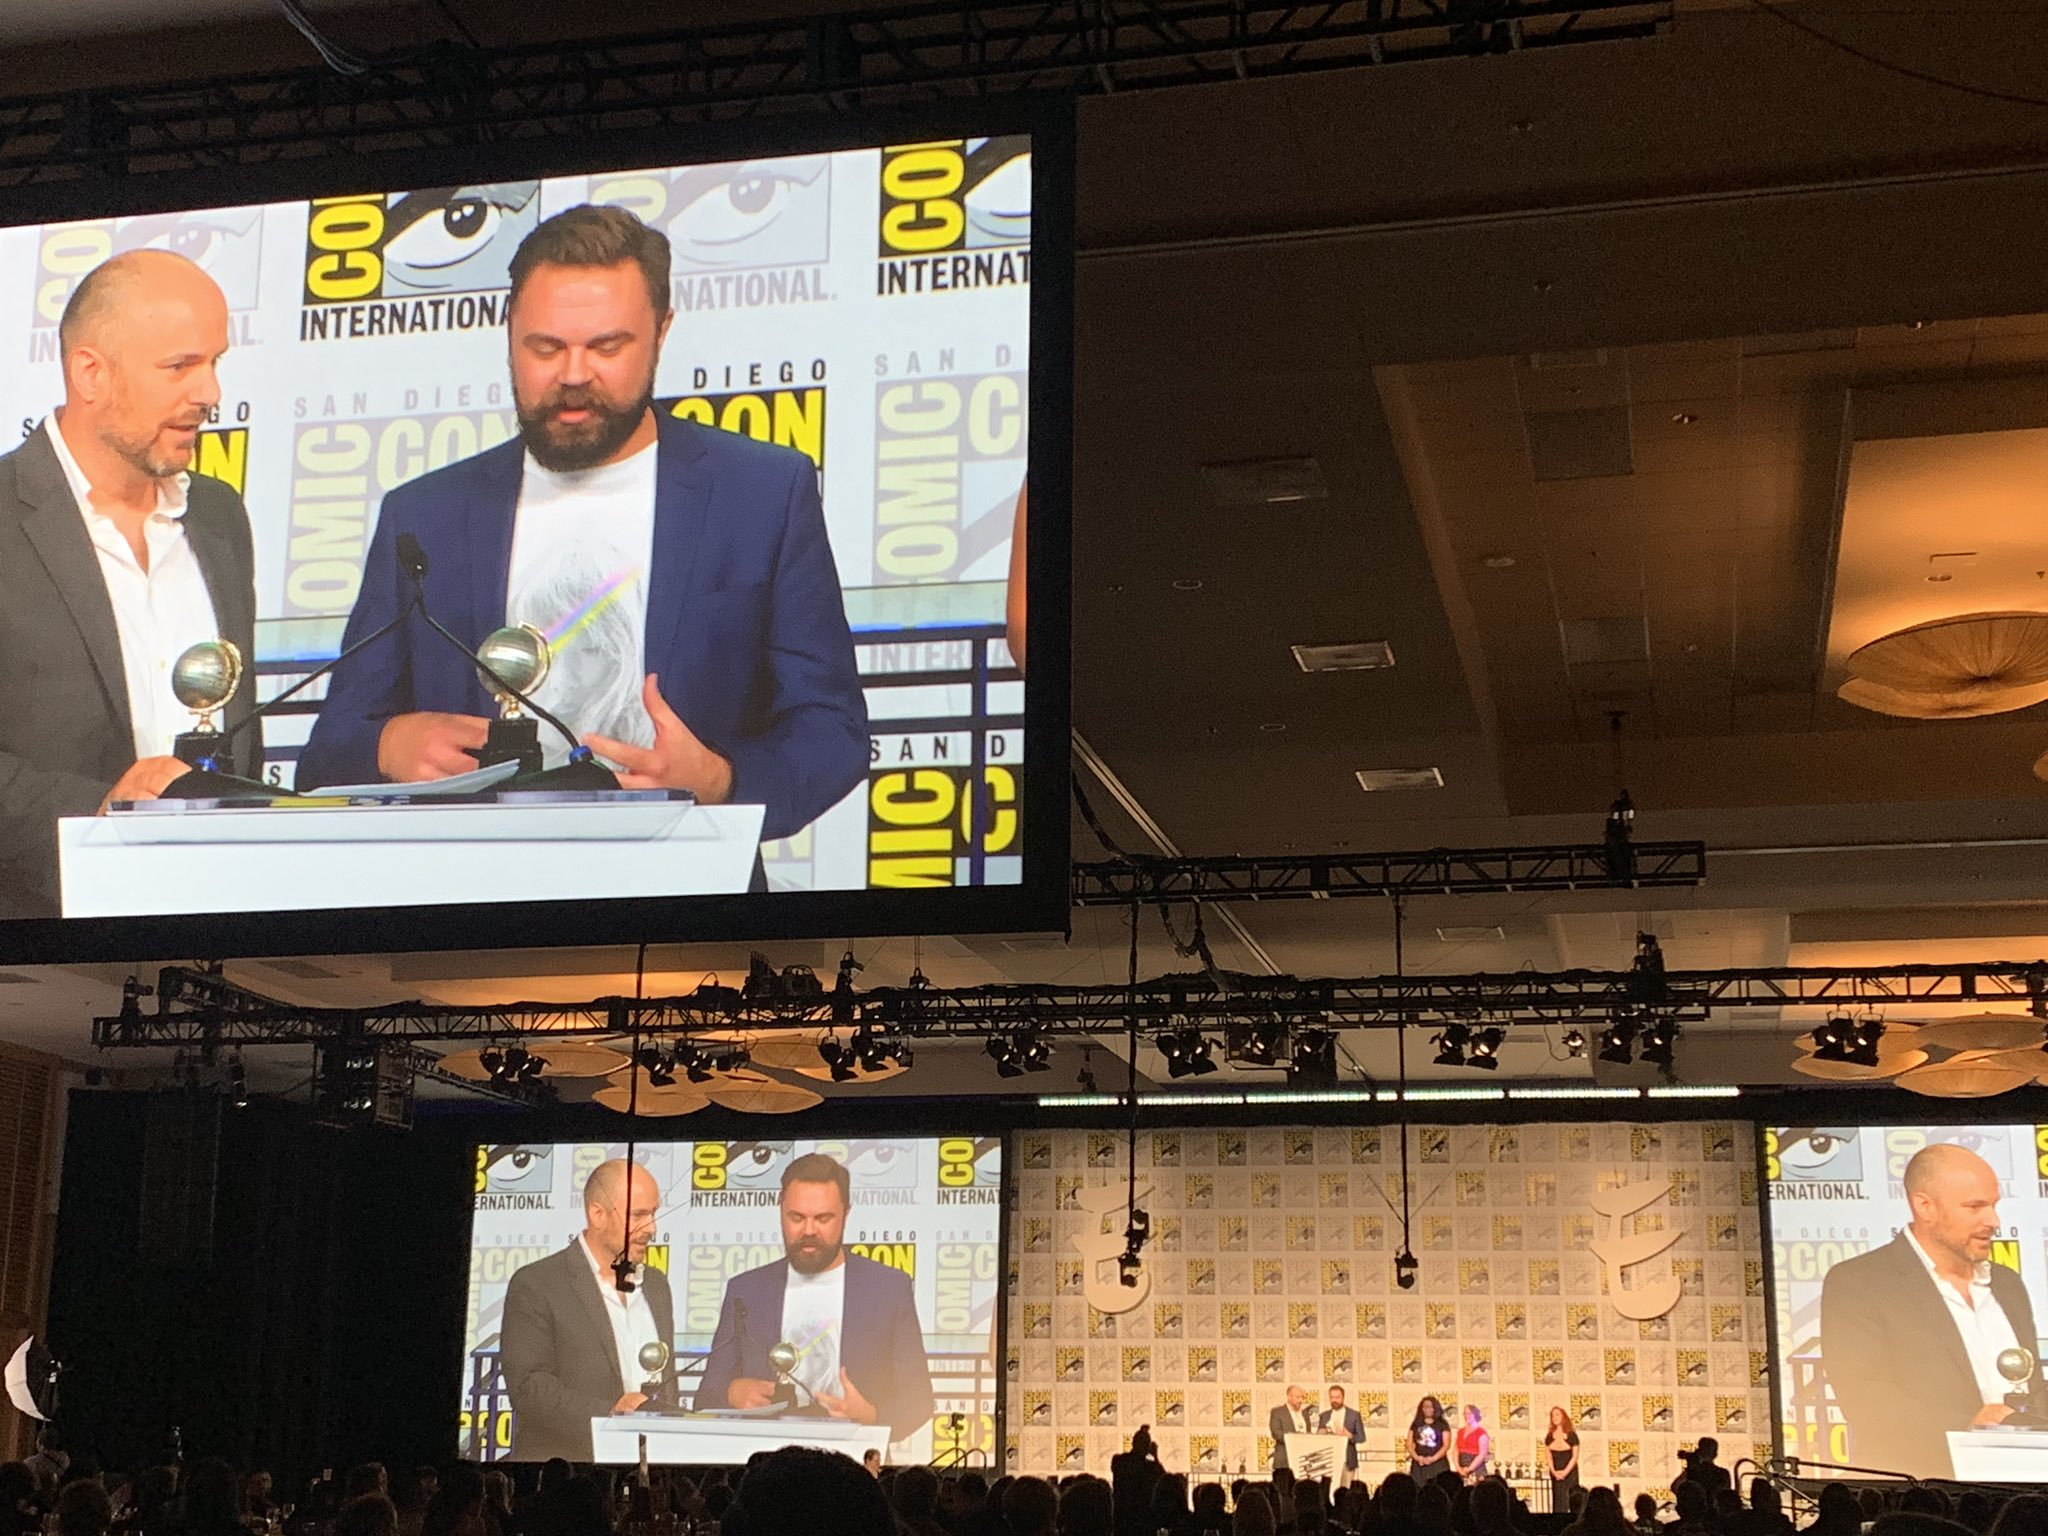 King and Gerads' 'Mister Miracle' wins best limited series Eisner award